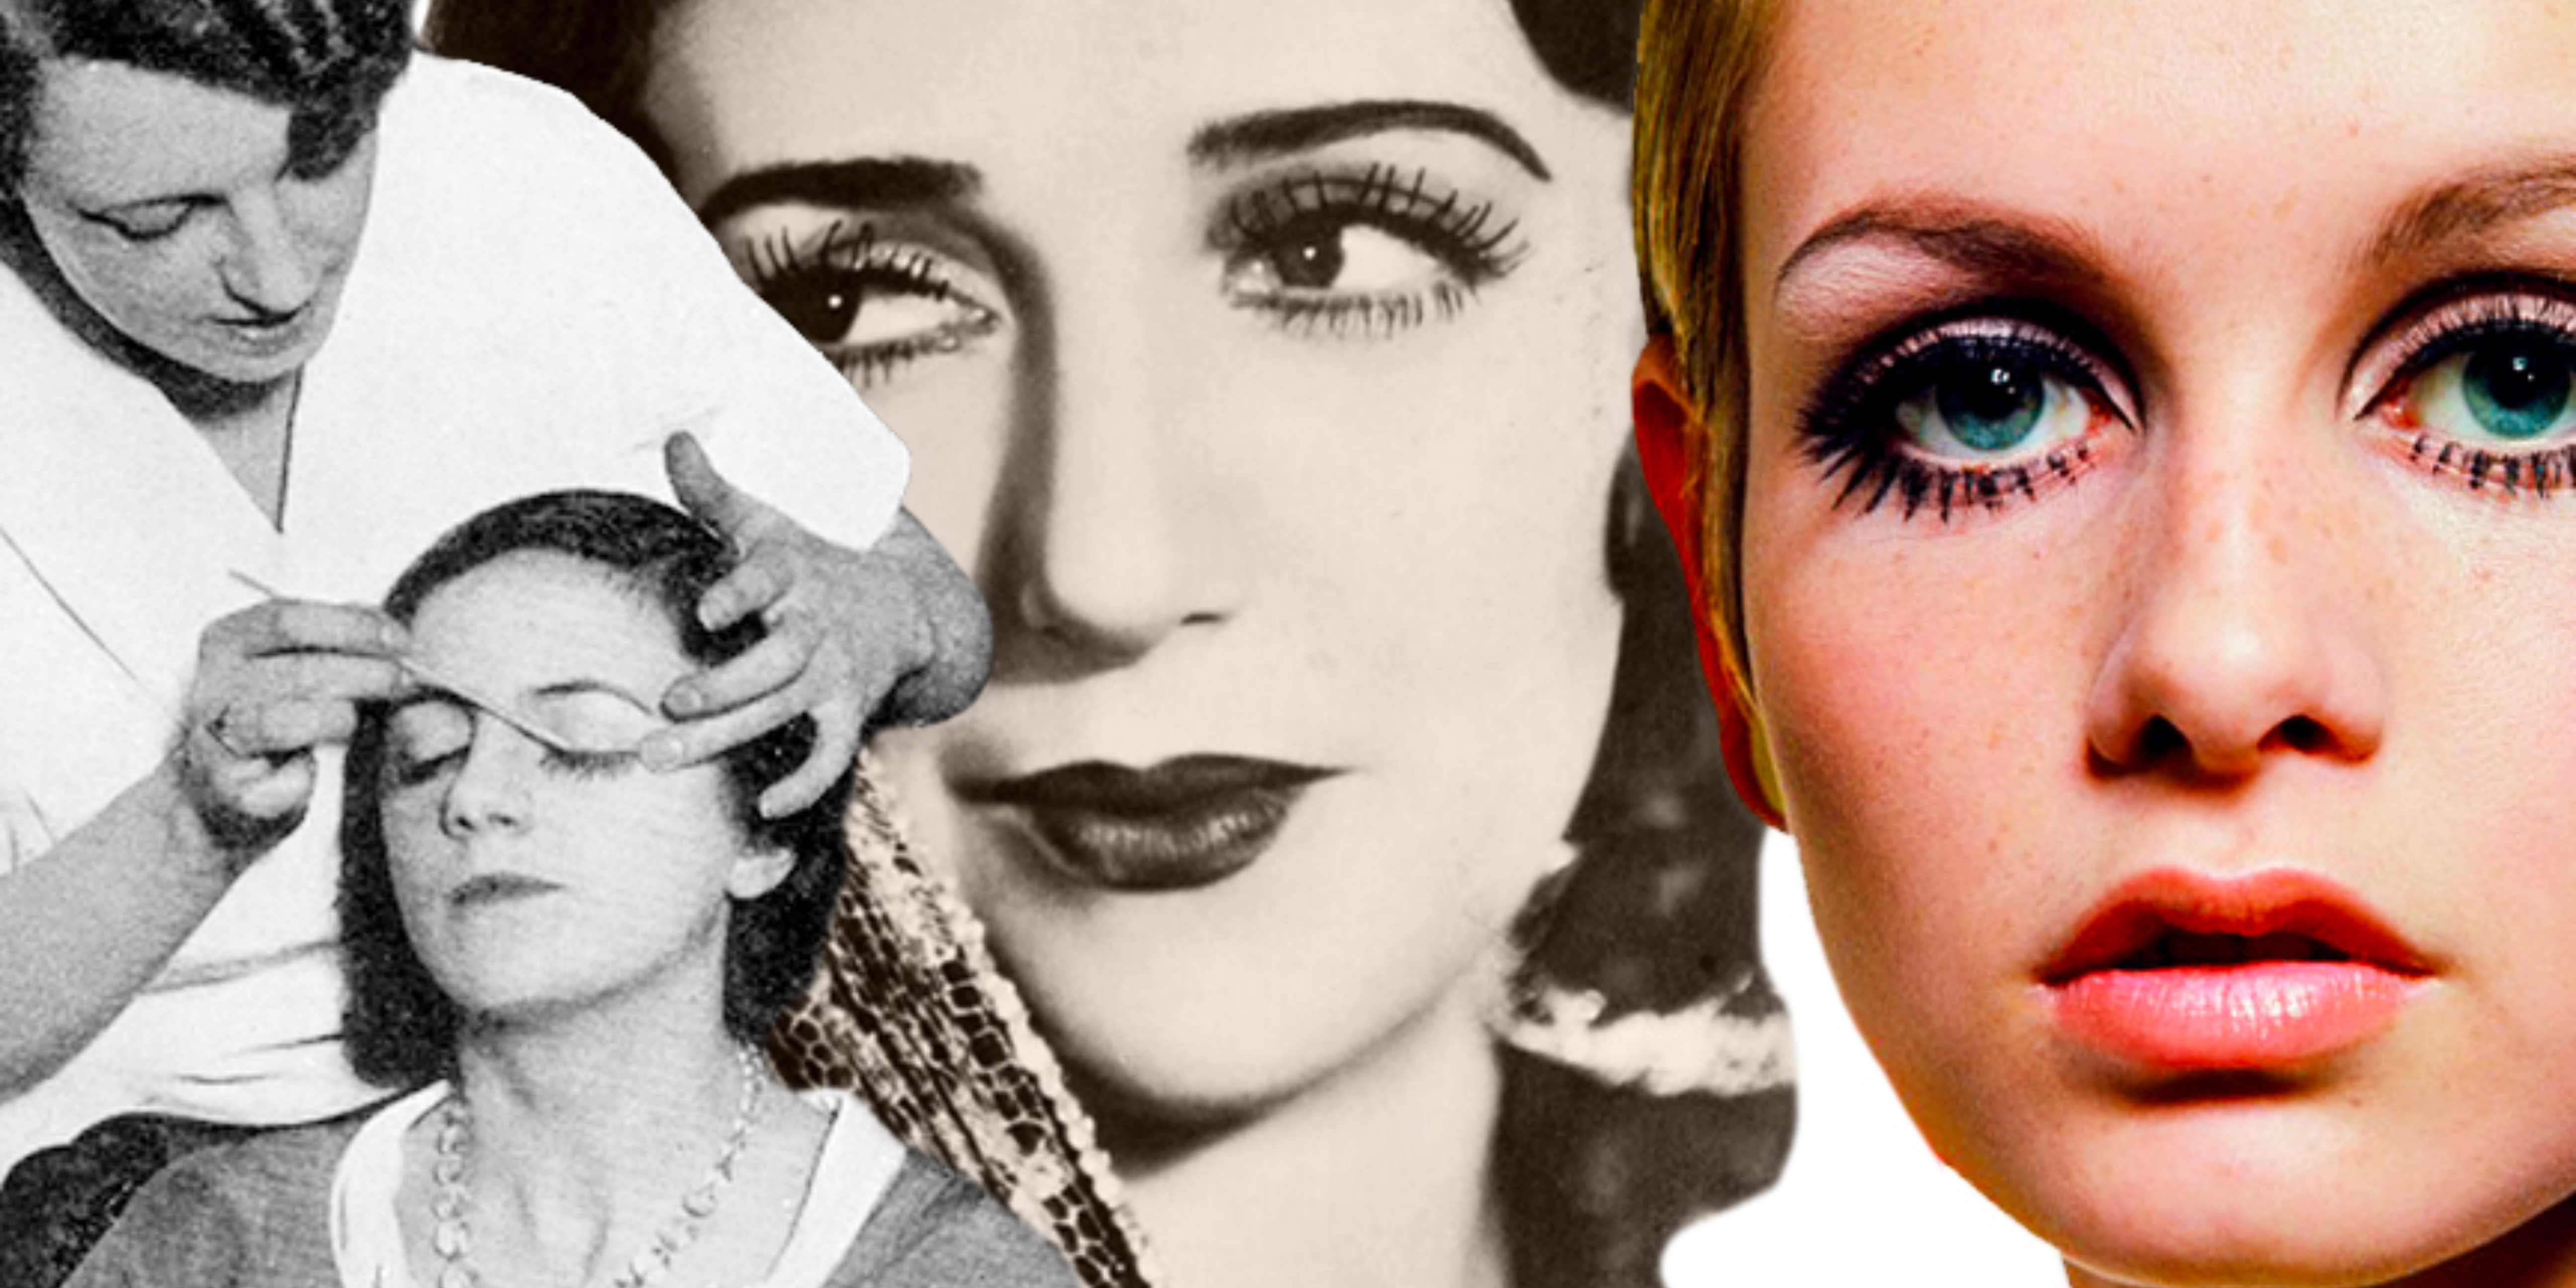 Why Do Long and Dark Eyelashes Captivate Us? The Fascinating Psychology Behind Our Obsession